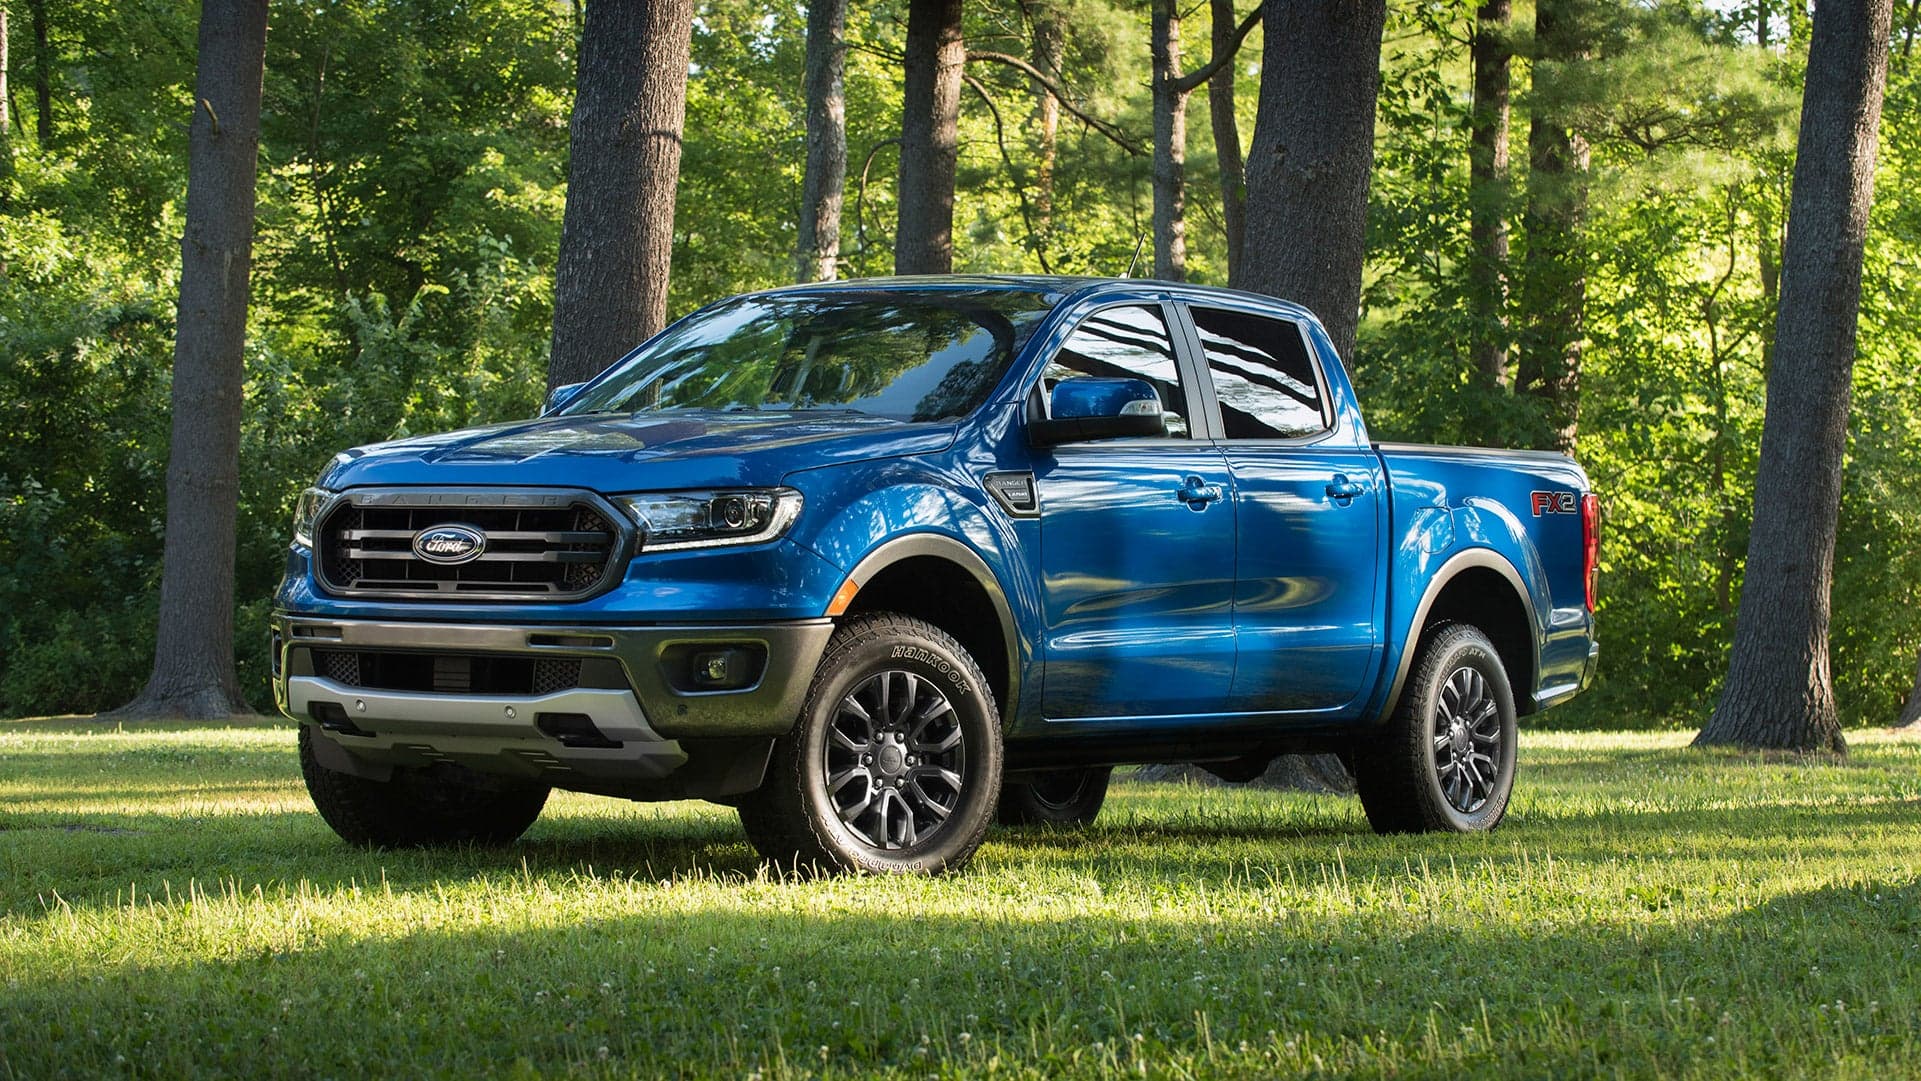 New Ford Ranger FX2 Off-Road Package Makes 2WD Pickup Trucks Fun Again